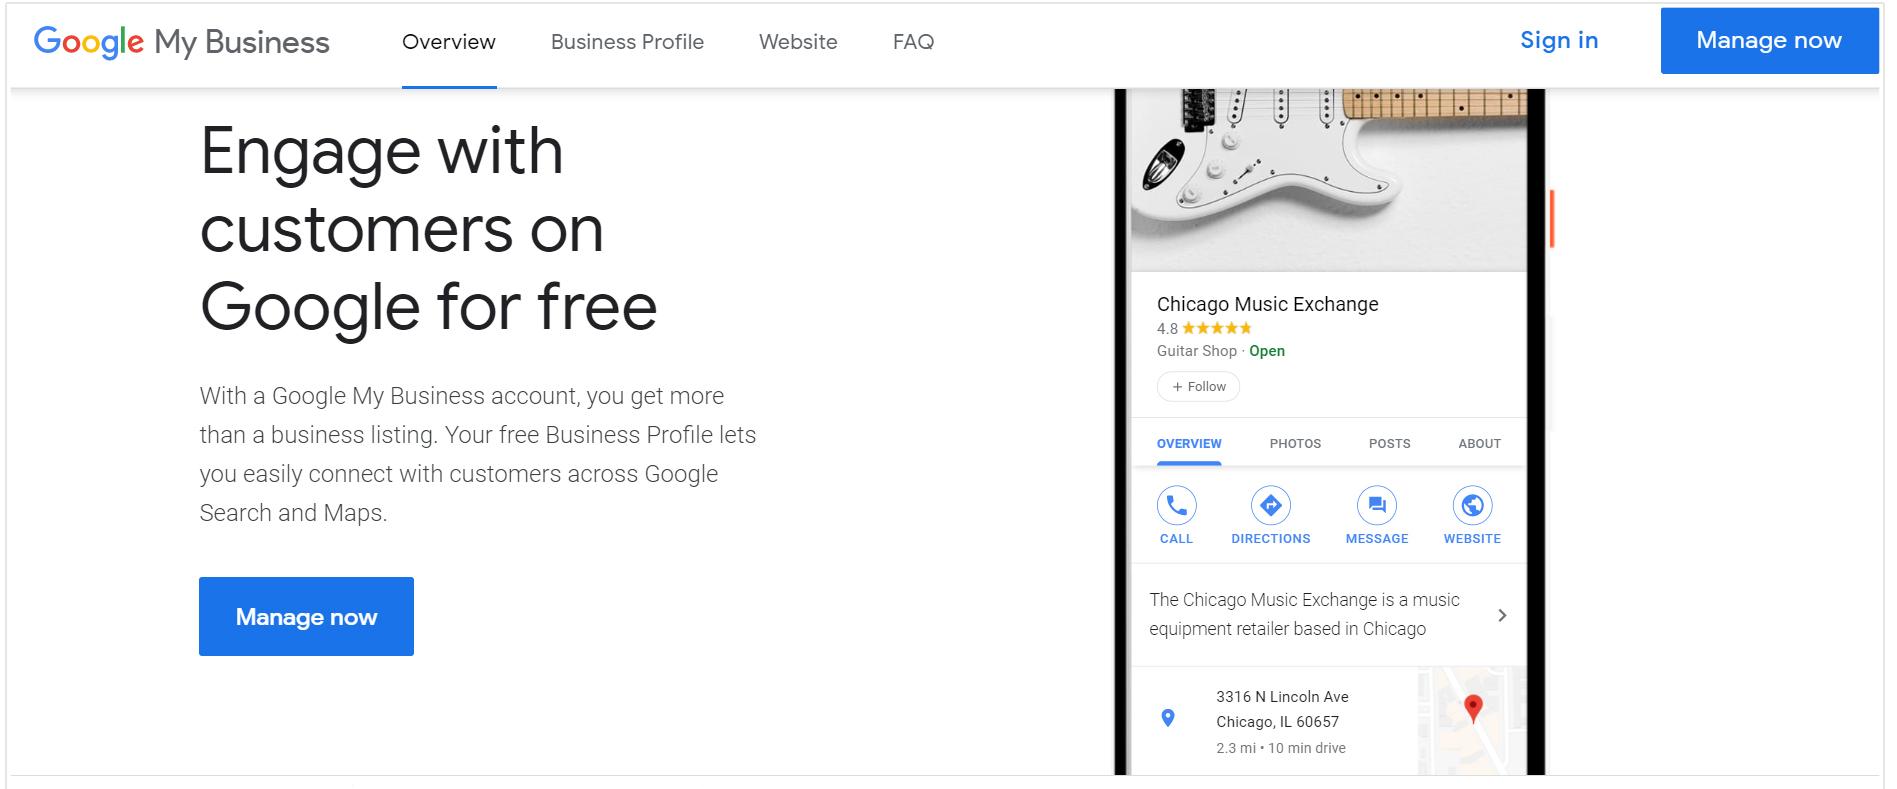 google my business sign up form